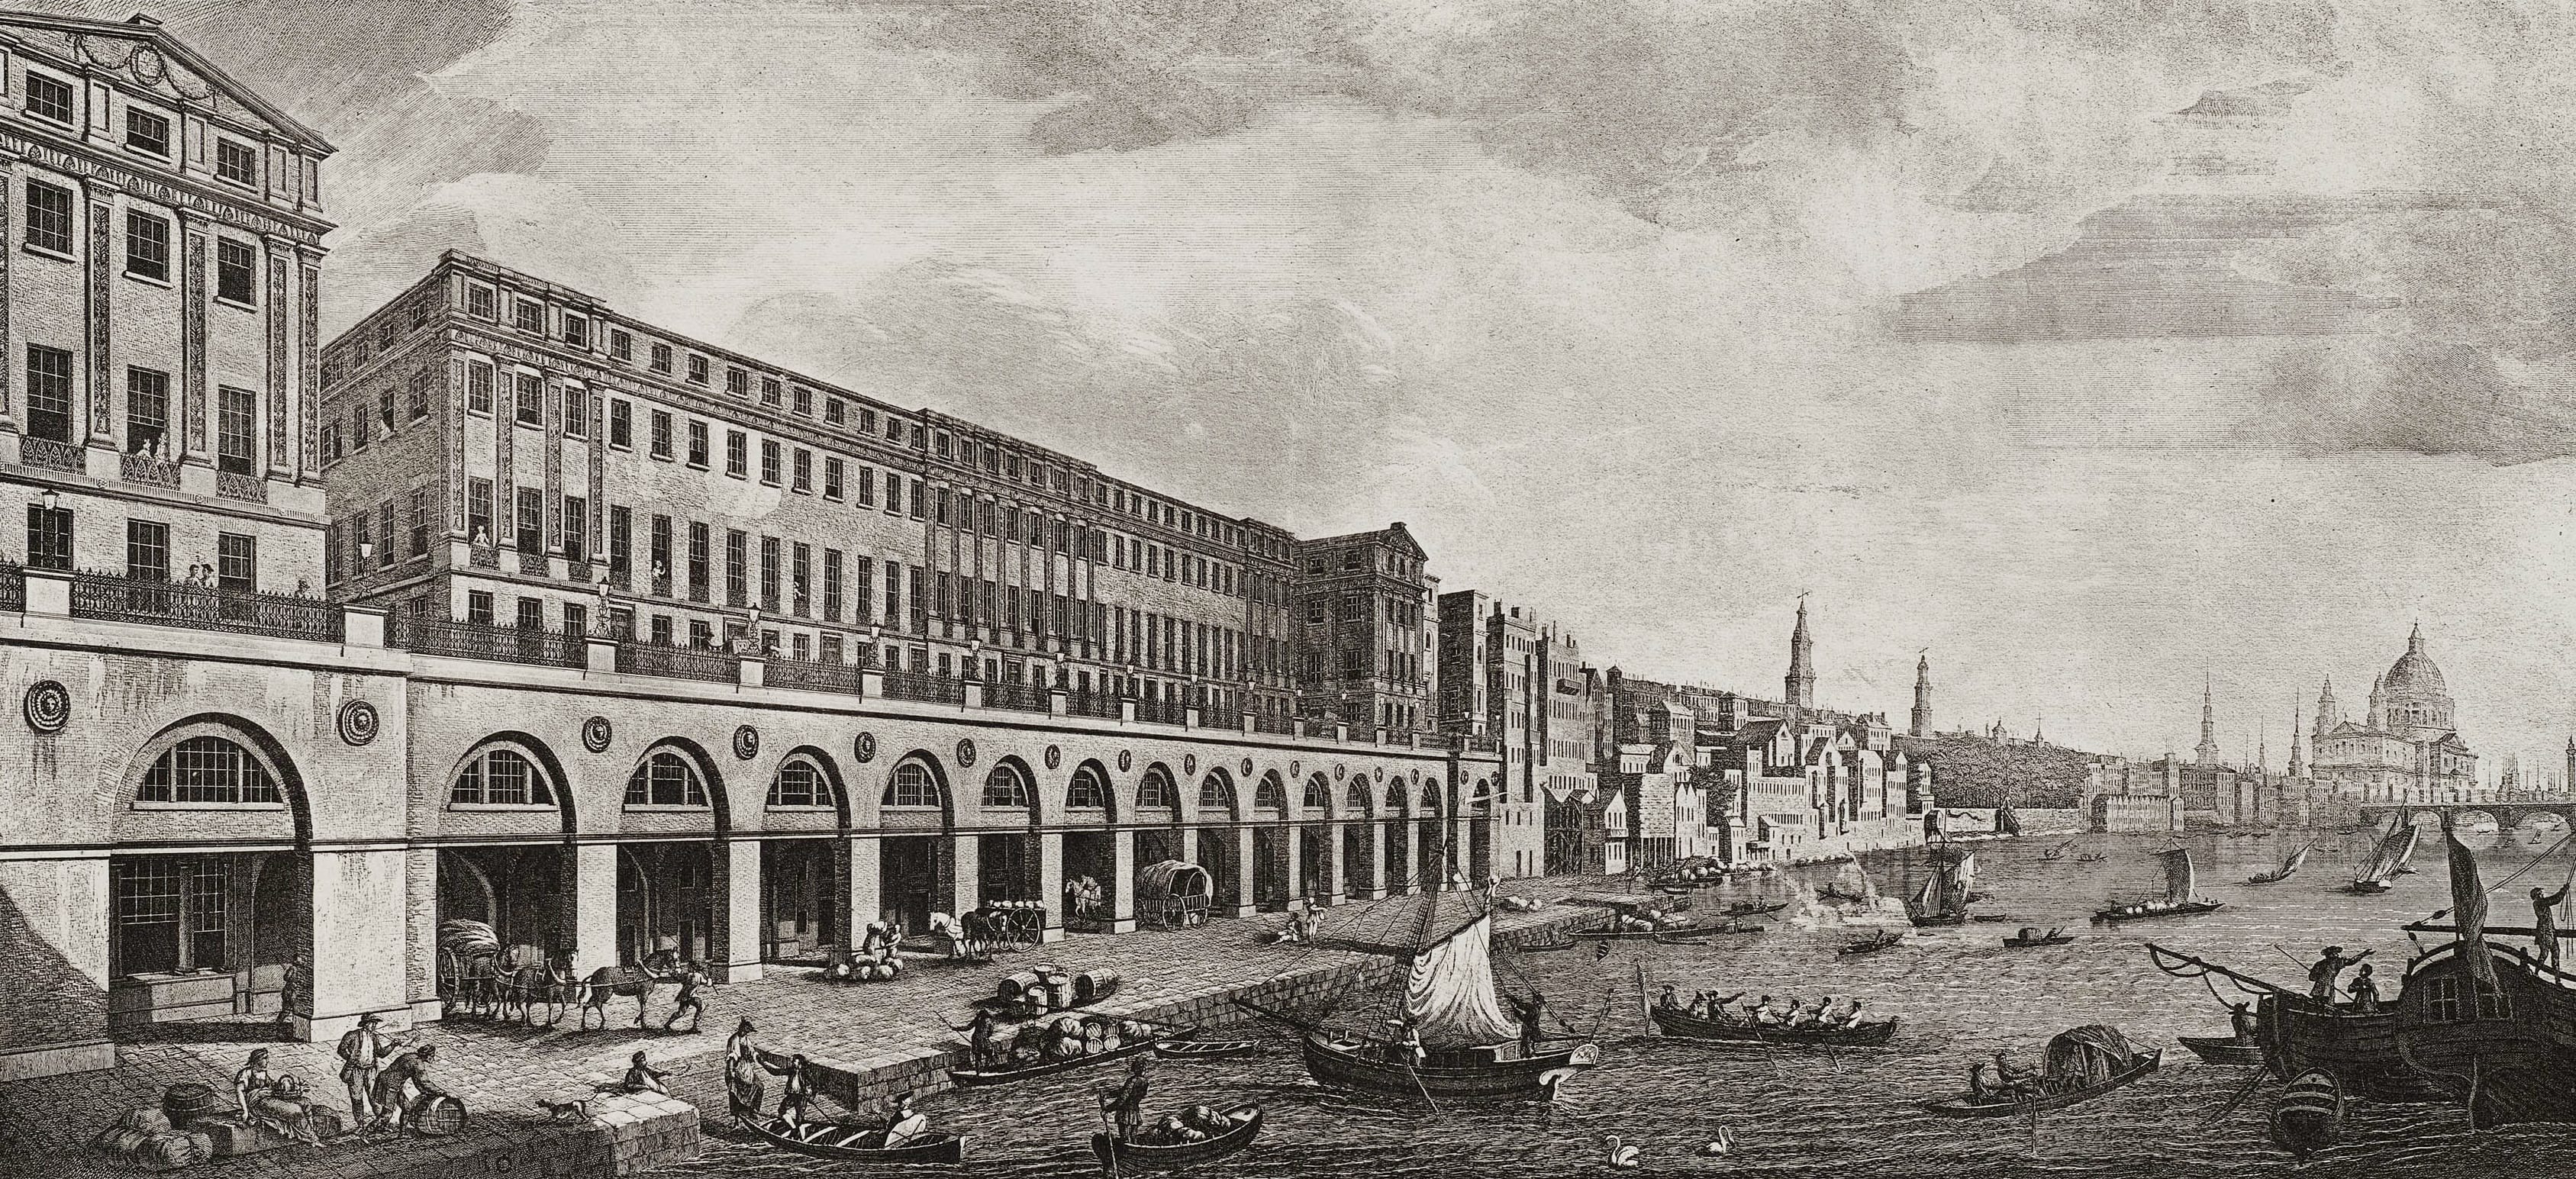 1 The Adelphi and the Thames riverside, looking east. Engraving by Benedetto Pastorini, reproduced in the third (posthumous) volume of the Adam brothers’ Works in Architecture (1822)